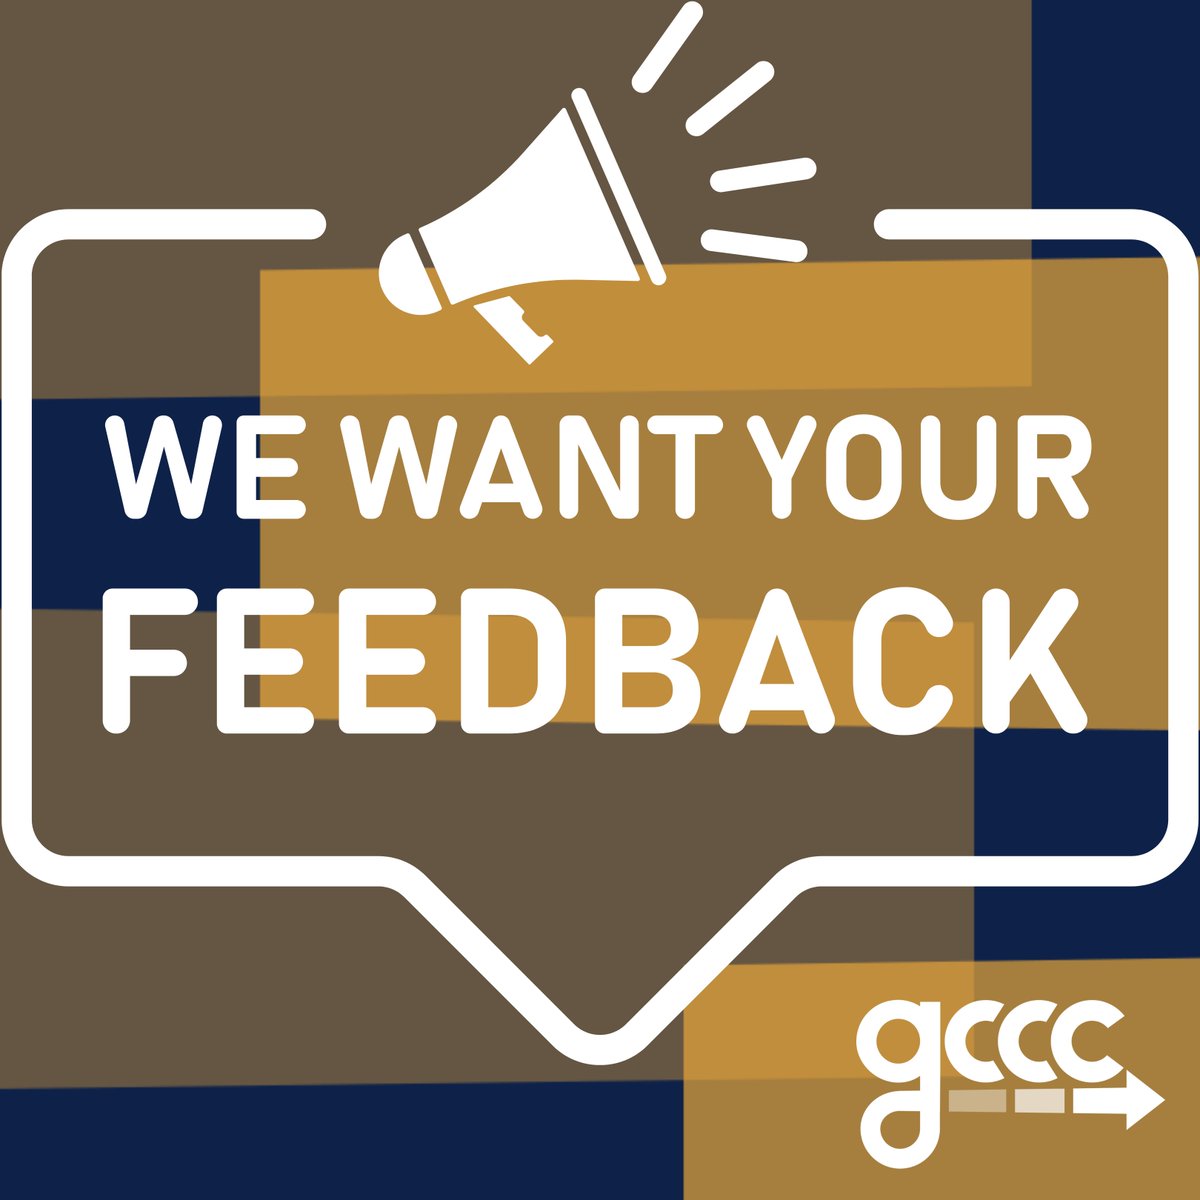 Please take a few minutes to share with us! We are seeking ✏️ input to understand how organizations in our region interact with various communities so that we can meaningfully engage in communities that affect and are affected by our work. Survey: surveymonkey.com/r/JBFYBNY